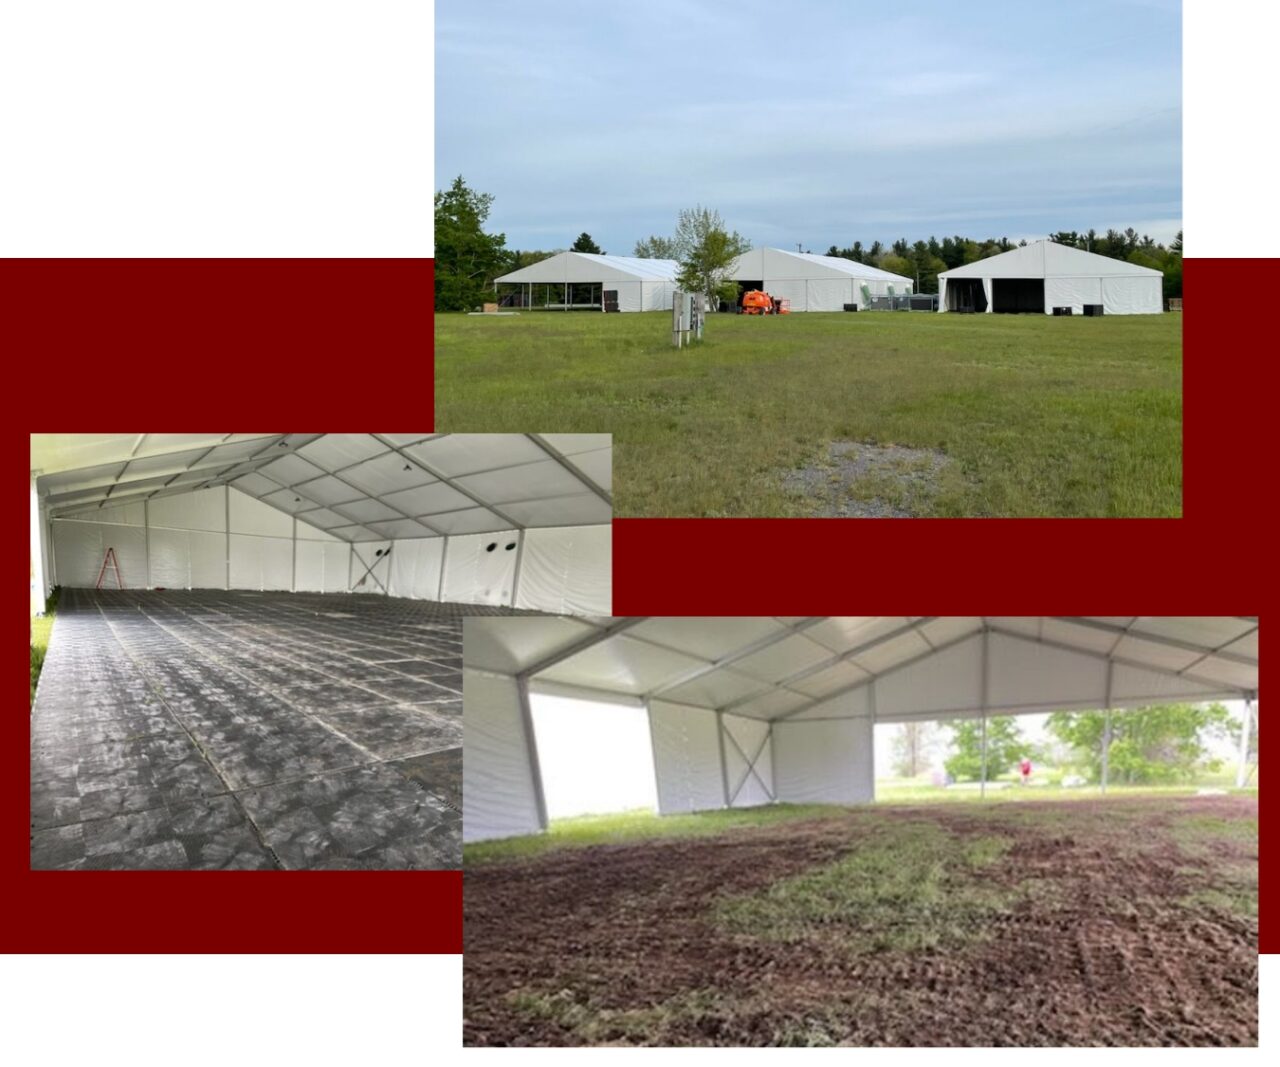 Lodging Solutions and Industrial Tent Systems Project Highlight for Government Military U.S. Army Training Operation